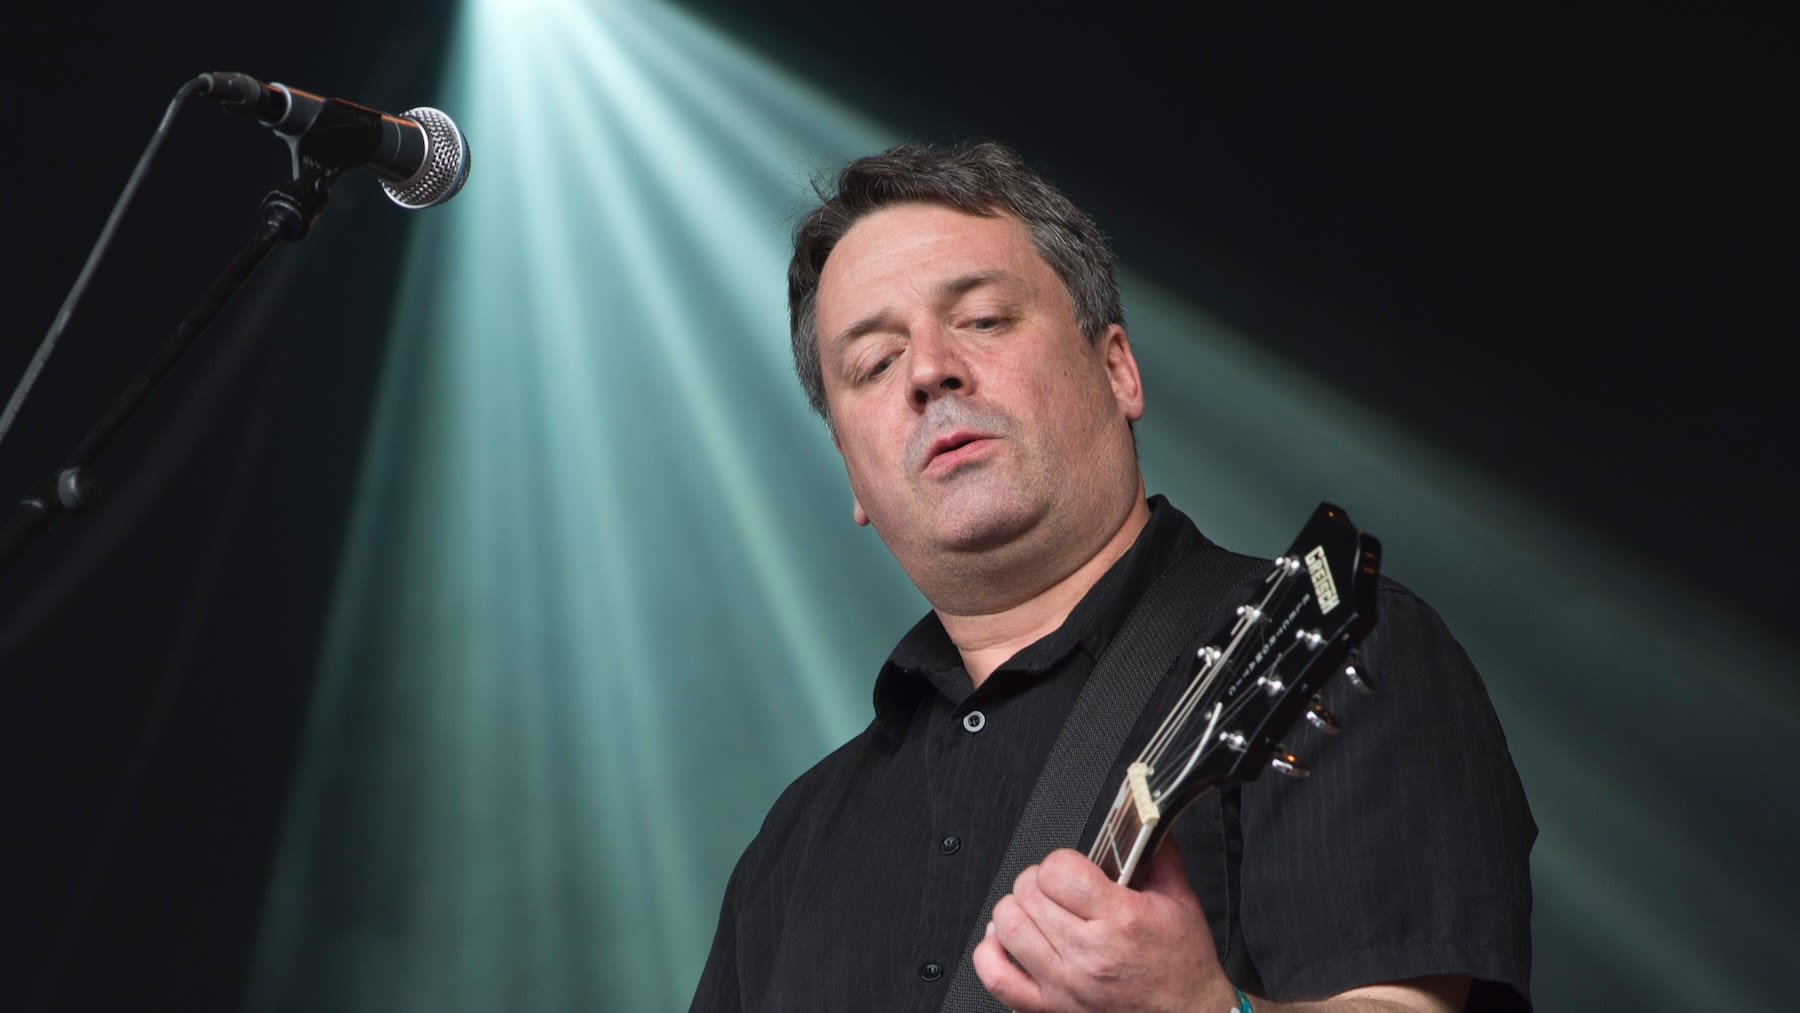 Martin Phillipps, Founder of The Chills, Dead at 61